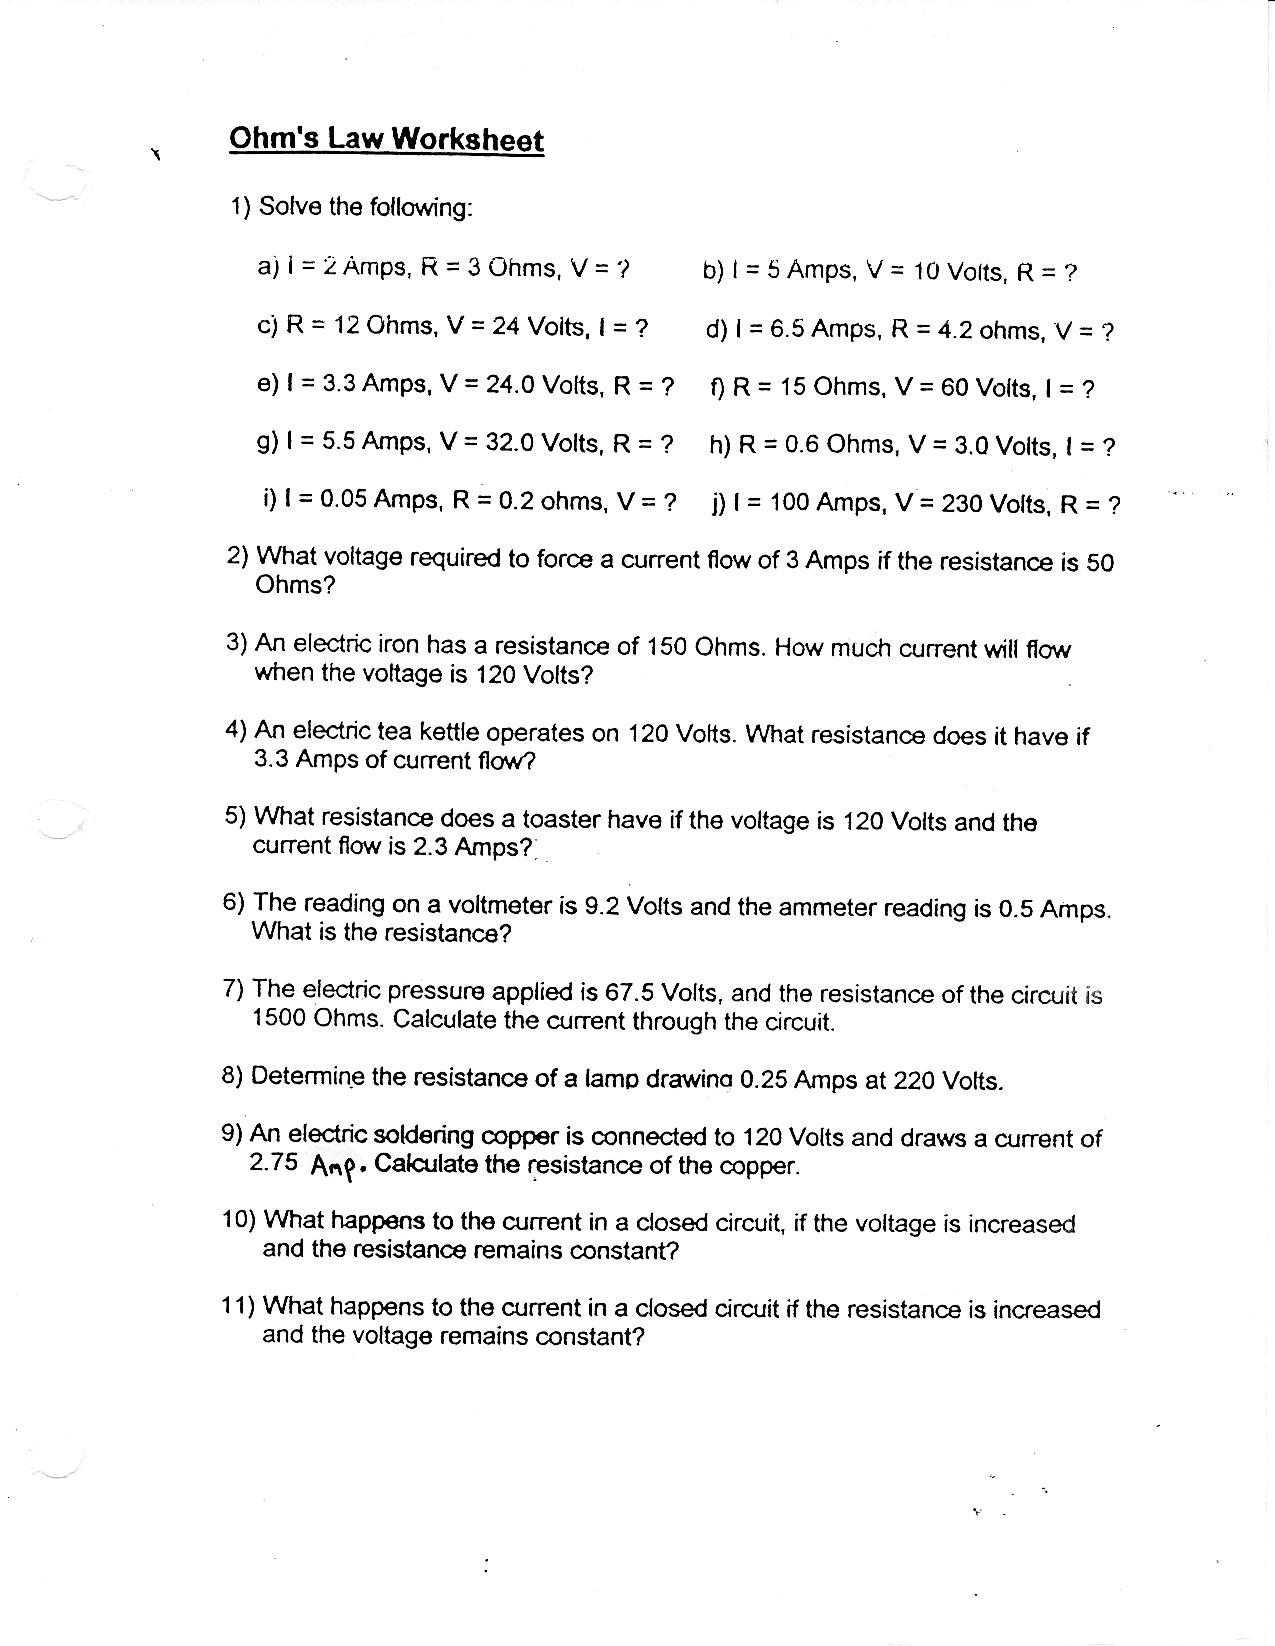 Ohms Law Worksheet Answers Image